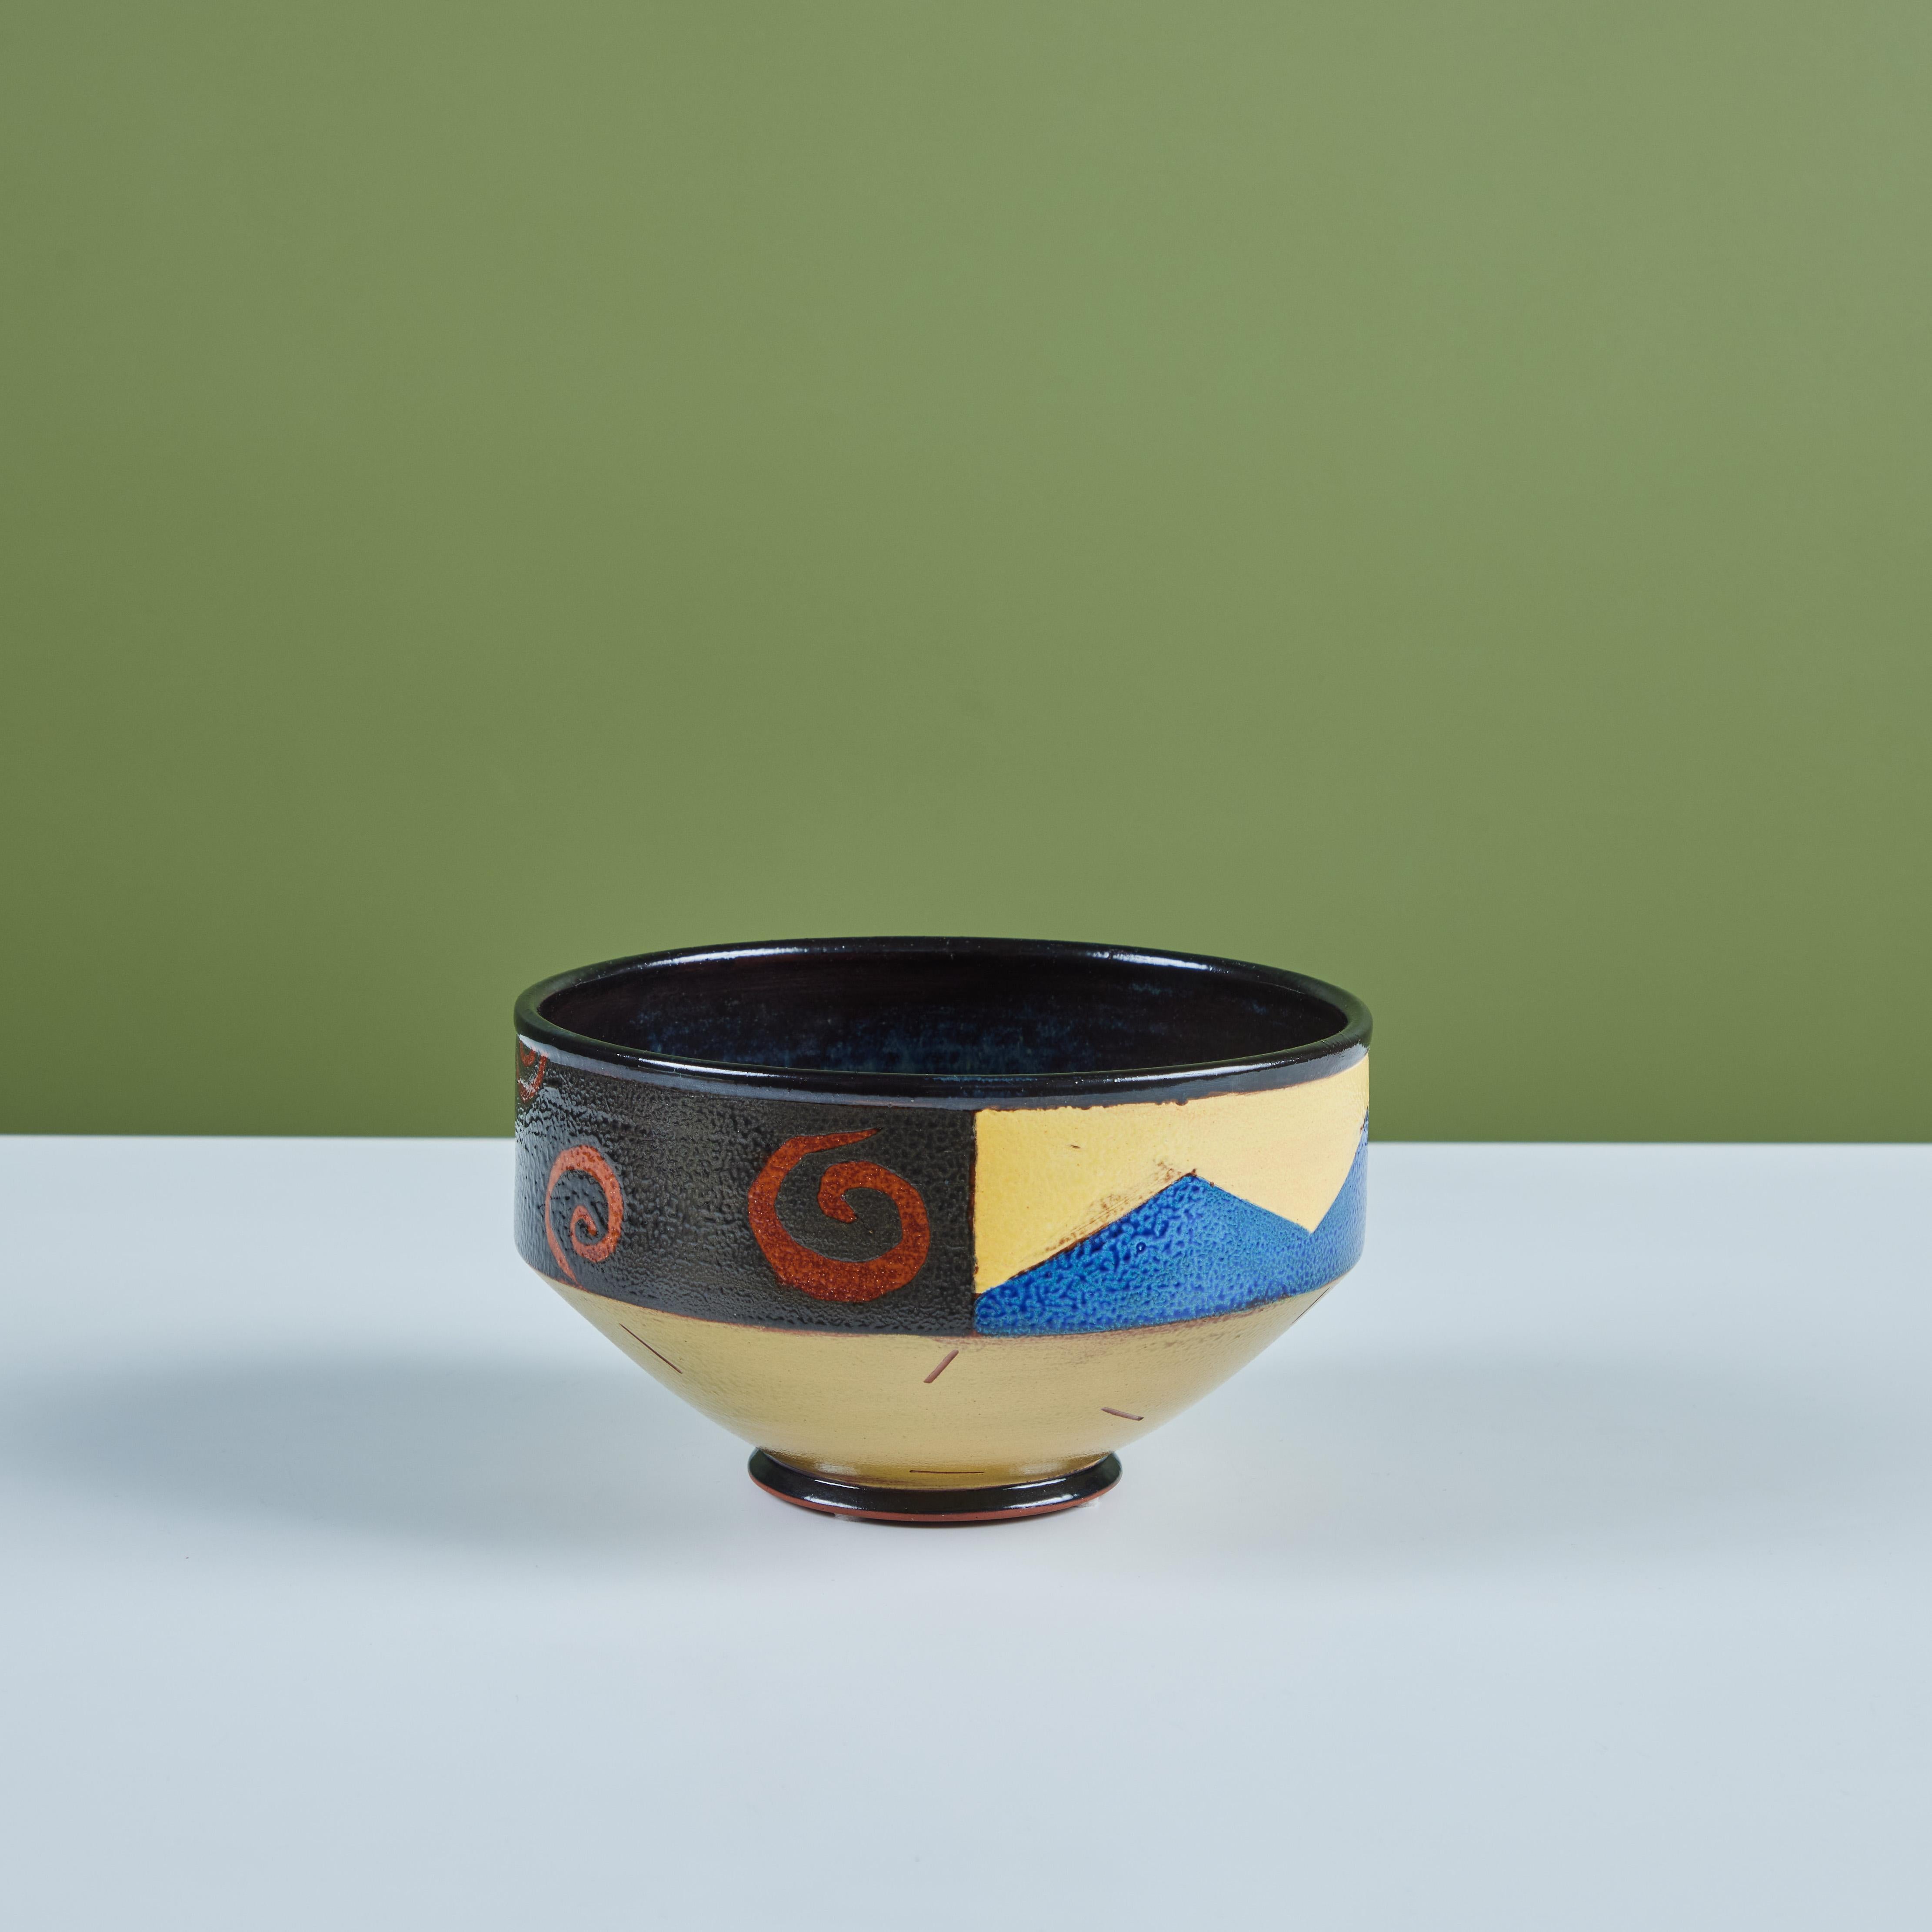 Ceramic bowl signed by the artist. The playful bowl has a black glazed interior. The exterior showcases different designs, geometric blue and yellow triangles, bright blue and orange leaves and burnt orange swirls. The bowl tapers towards the bottom